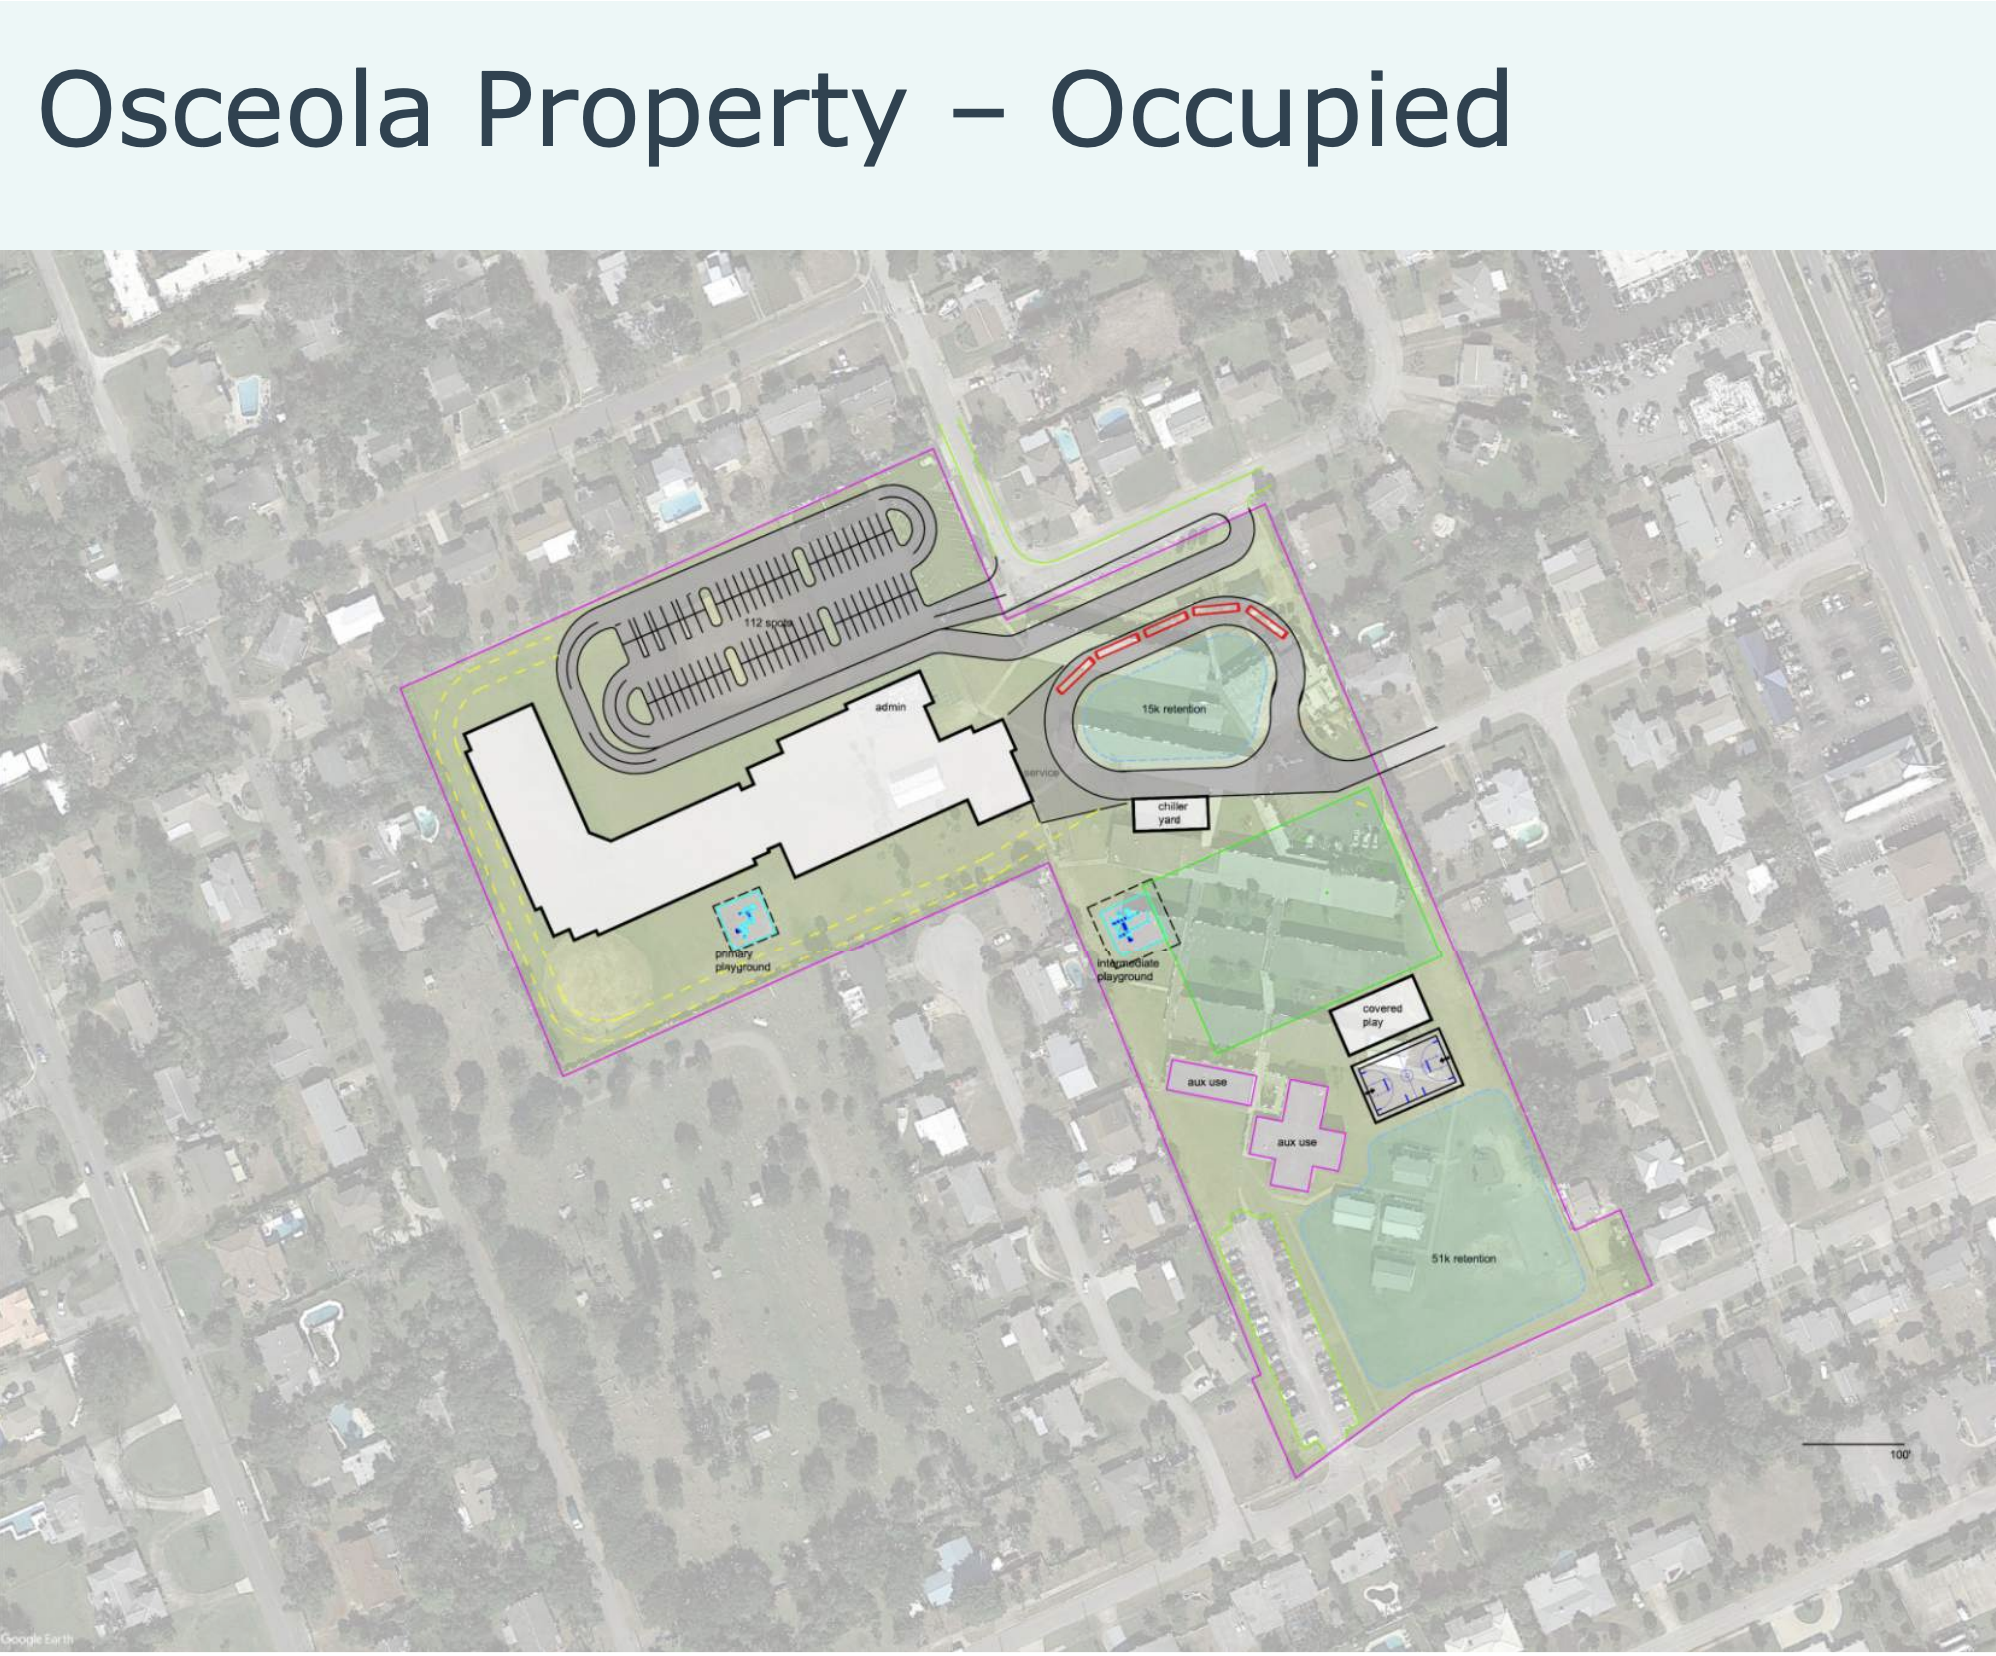 A plan showing what building on an occupied campus at Osceola would look like. Courtesy of Volusia County Schools/BRPH